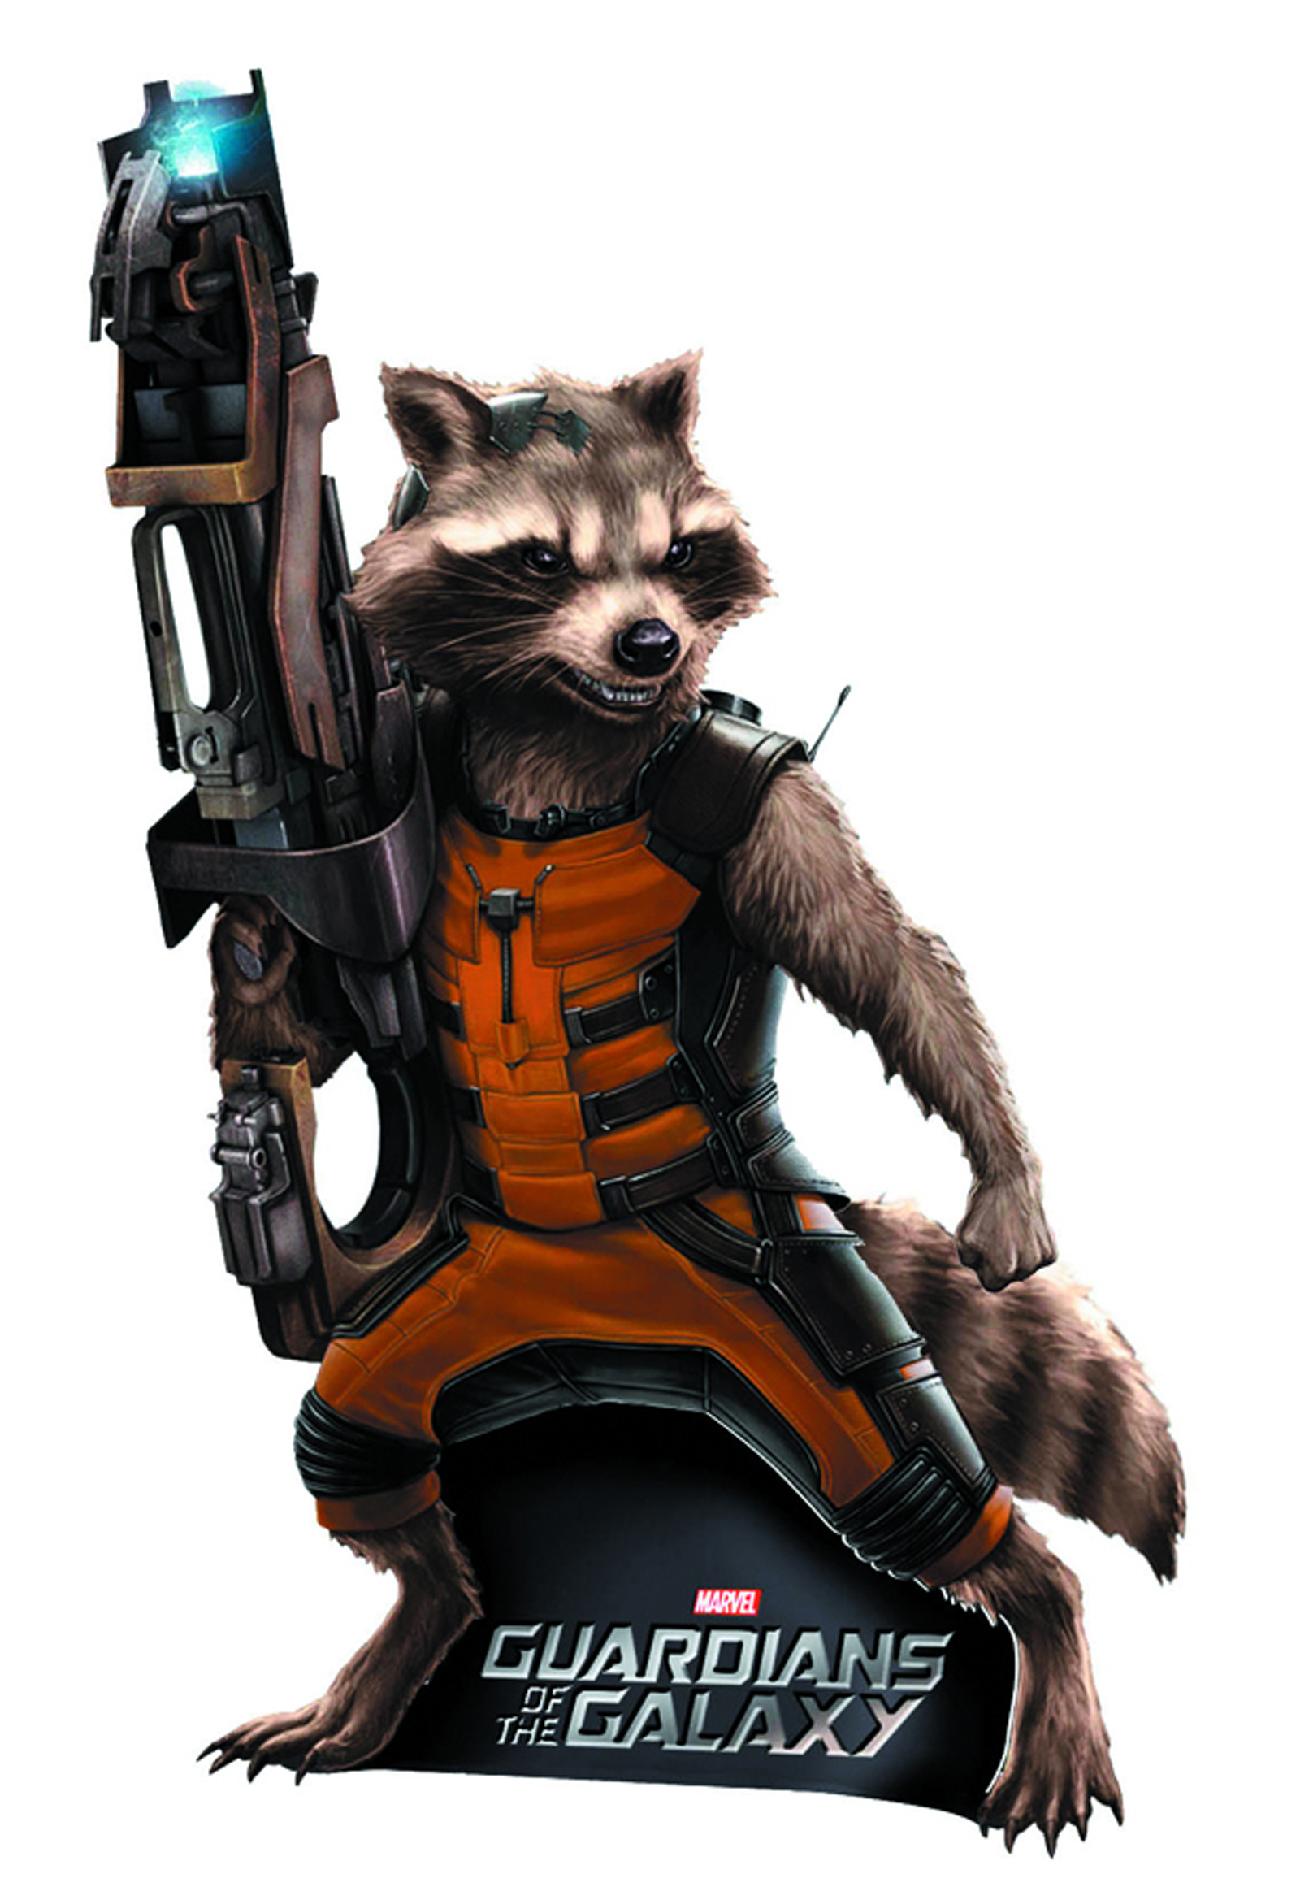 Monogram Products Guardians Of The Galaxy Rocket Raccoon Figural Bank